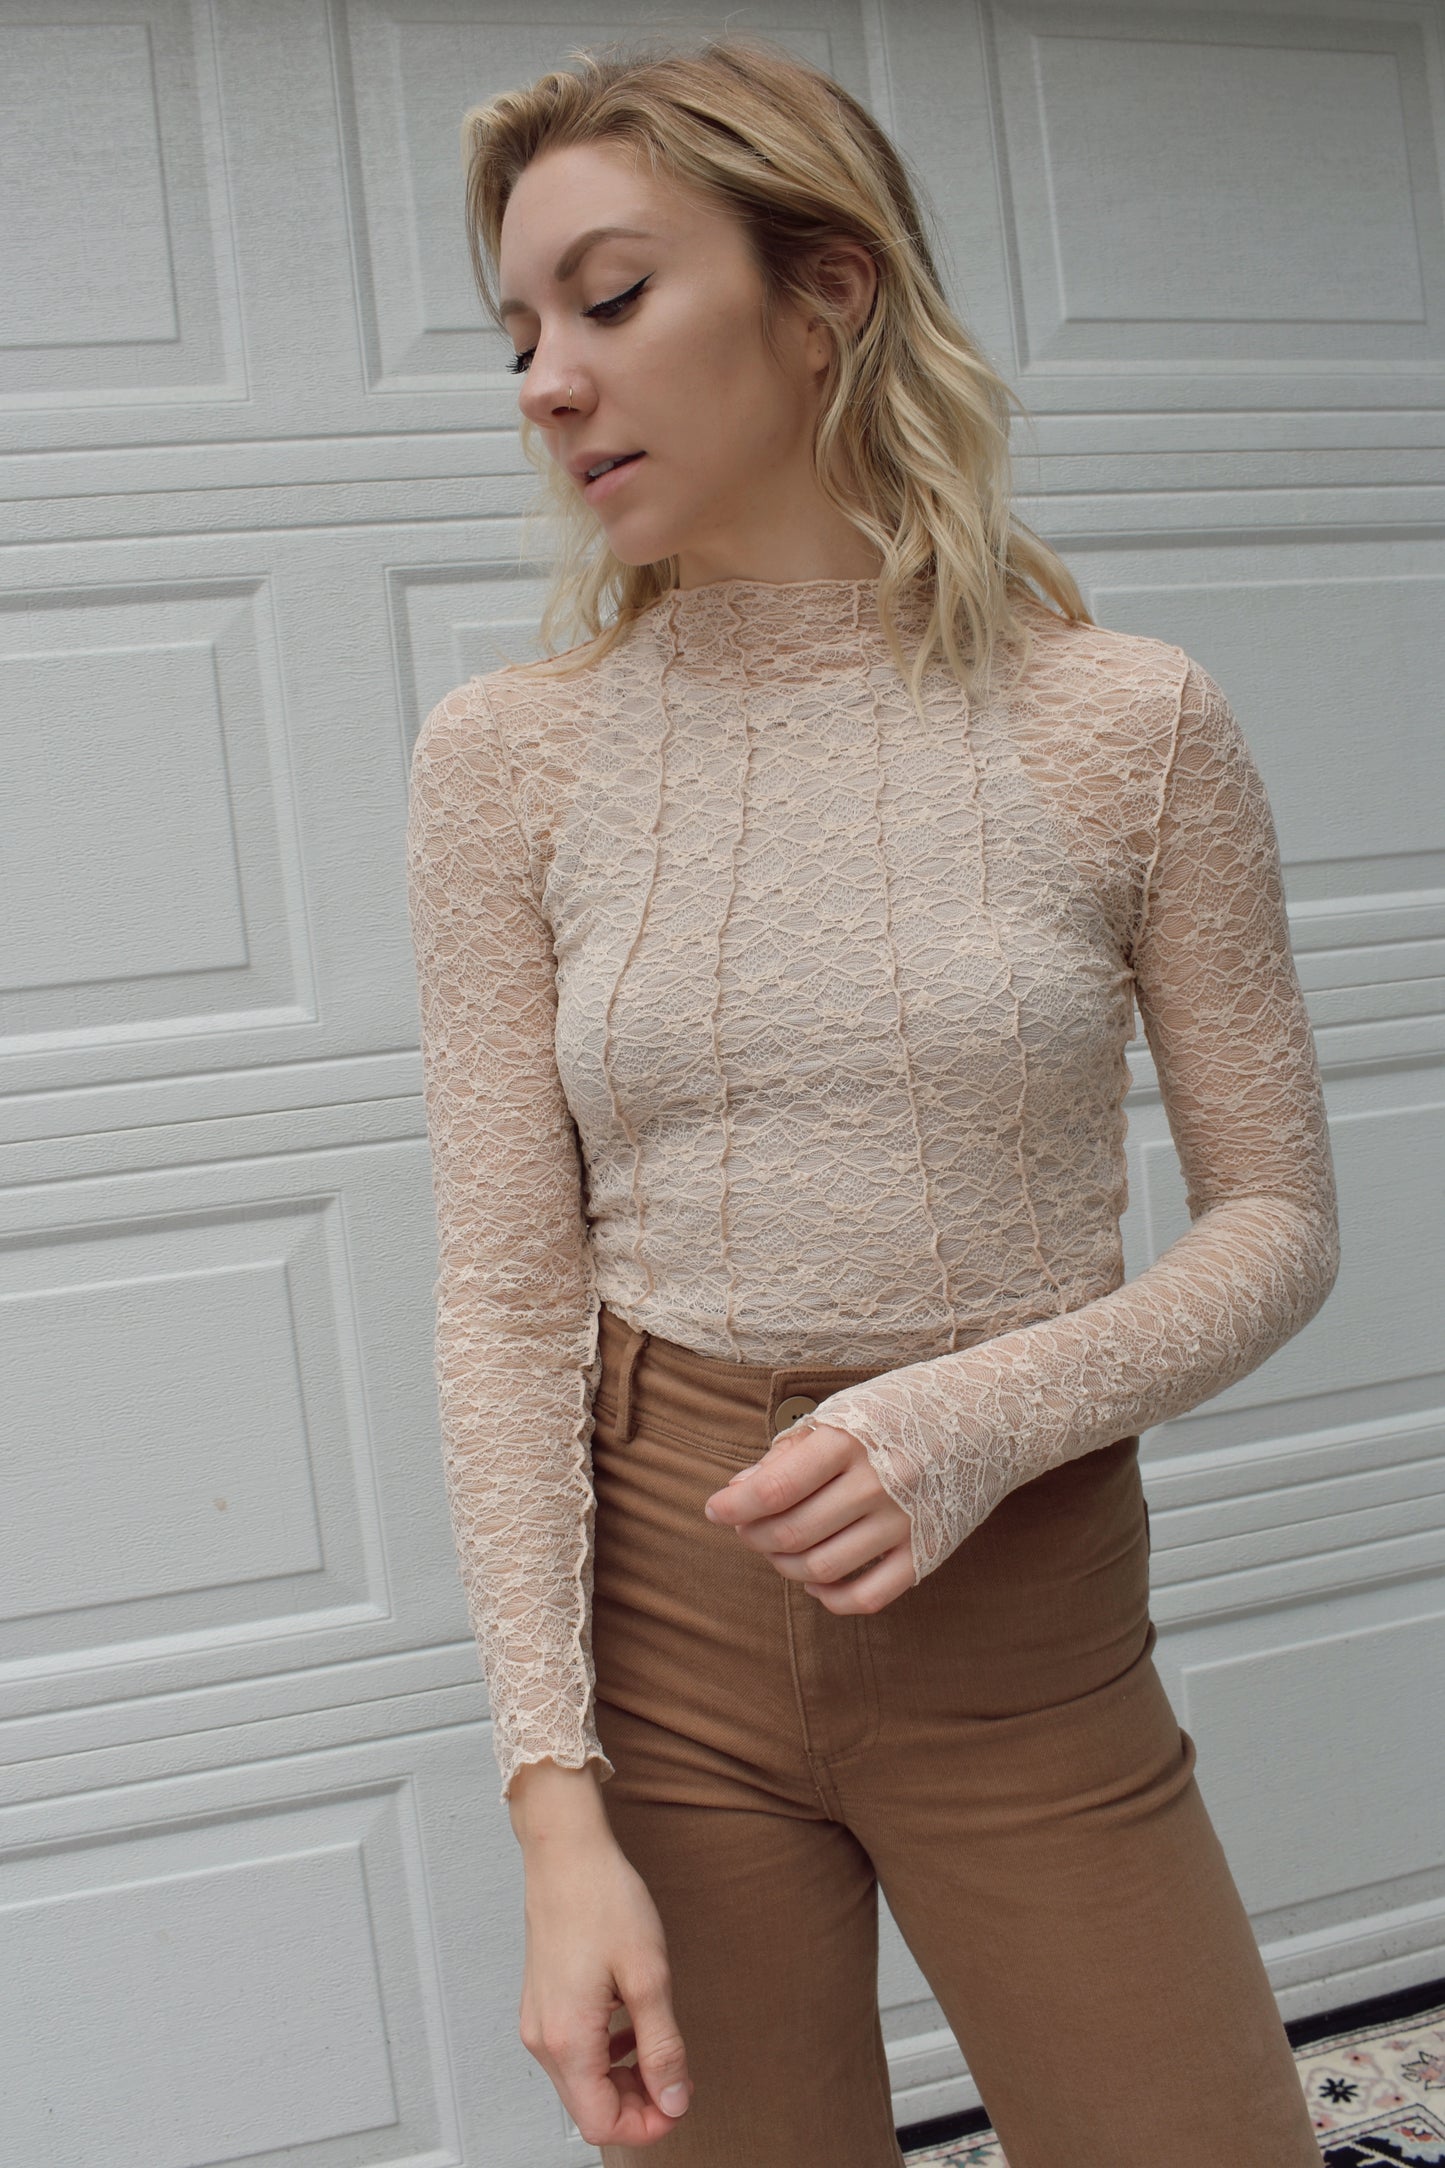 Illa Illa. Mod neck long sleeve sheer nude lace top with exposed seam detail along the front and back. Full length.